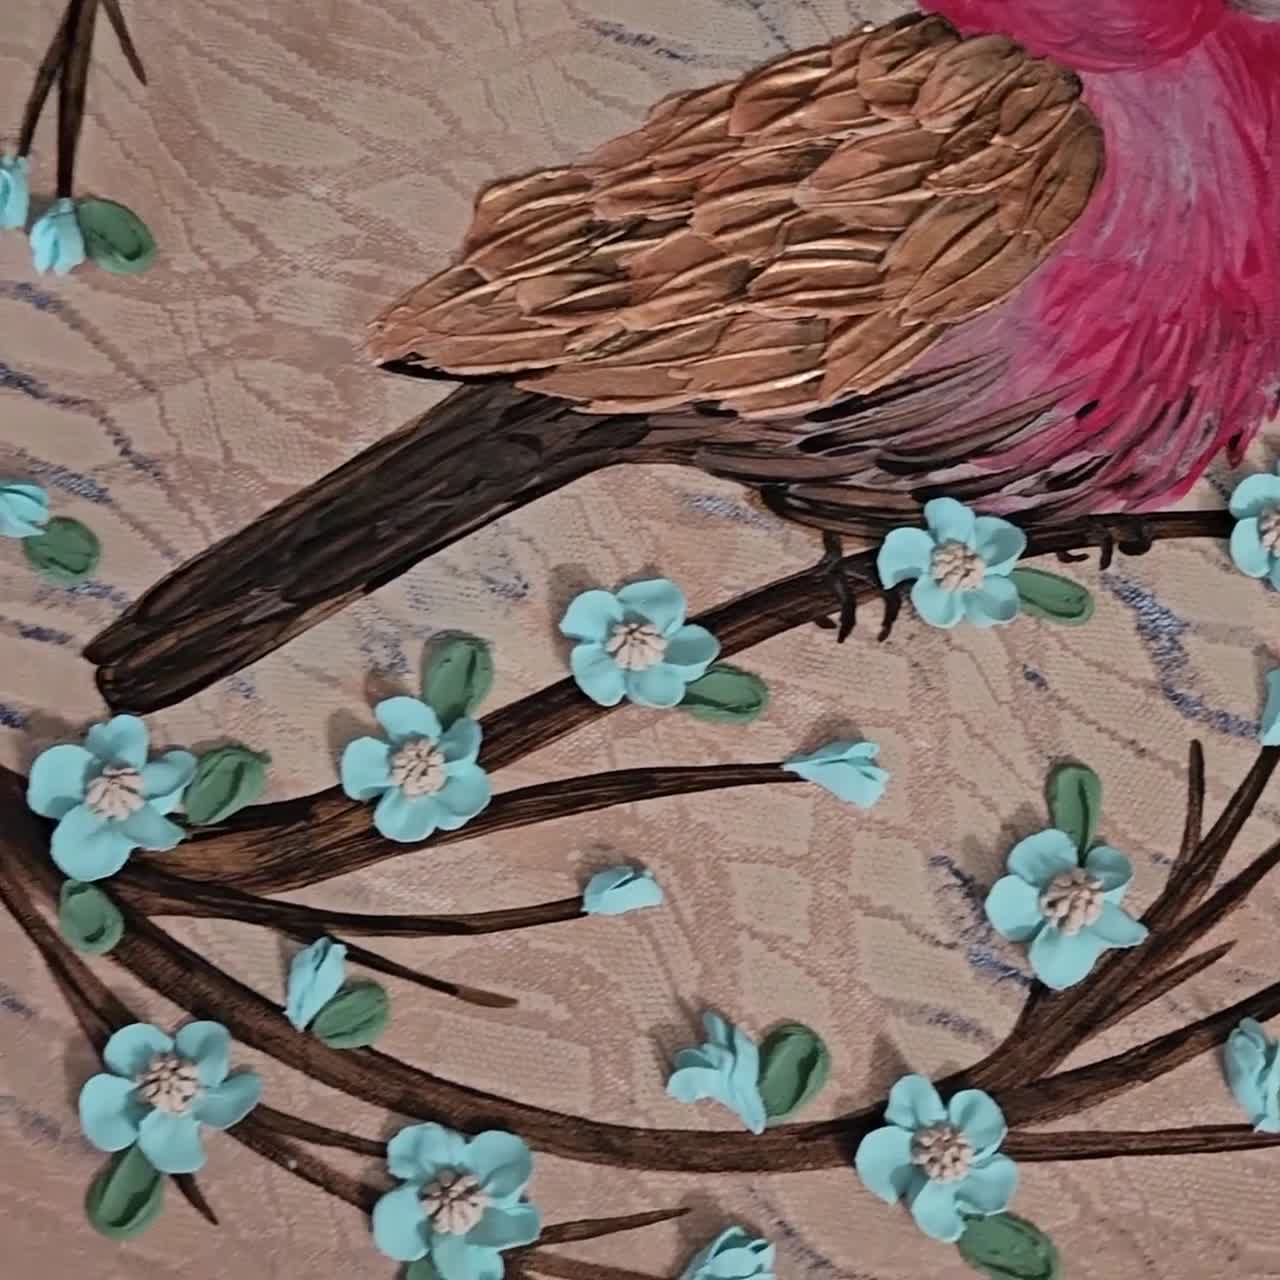 Impasto Textured Painting of Red Finch on Blooming Branch, 20x20